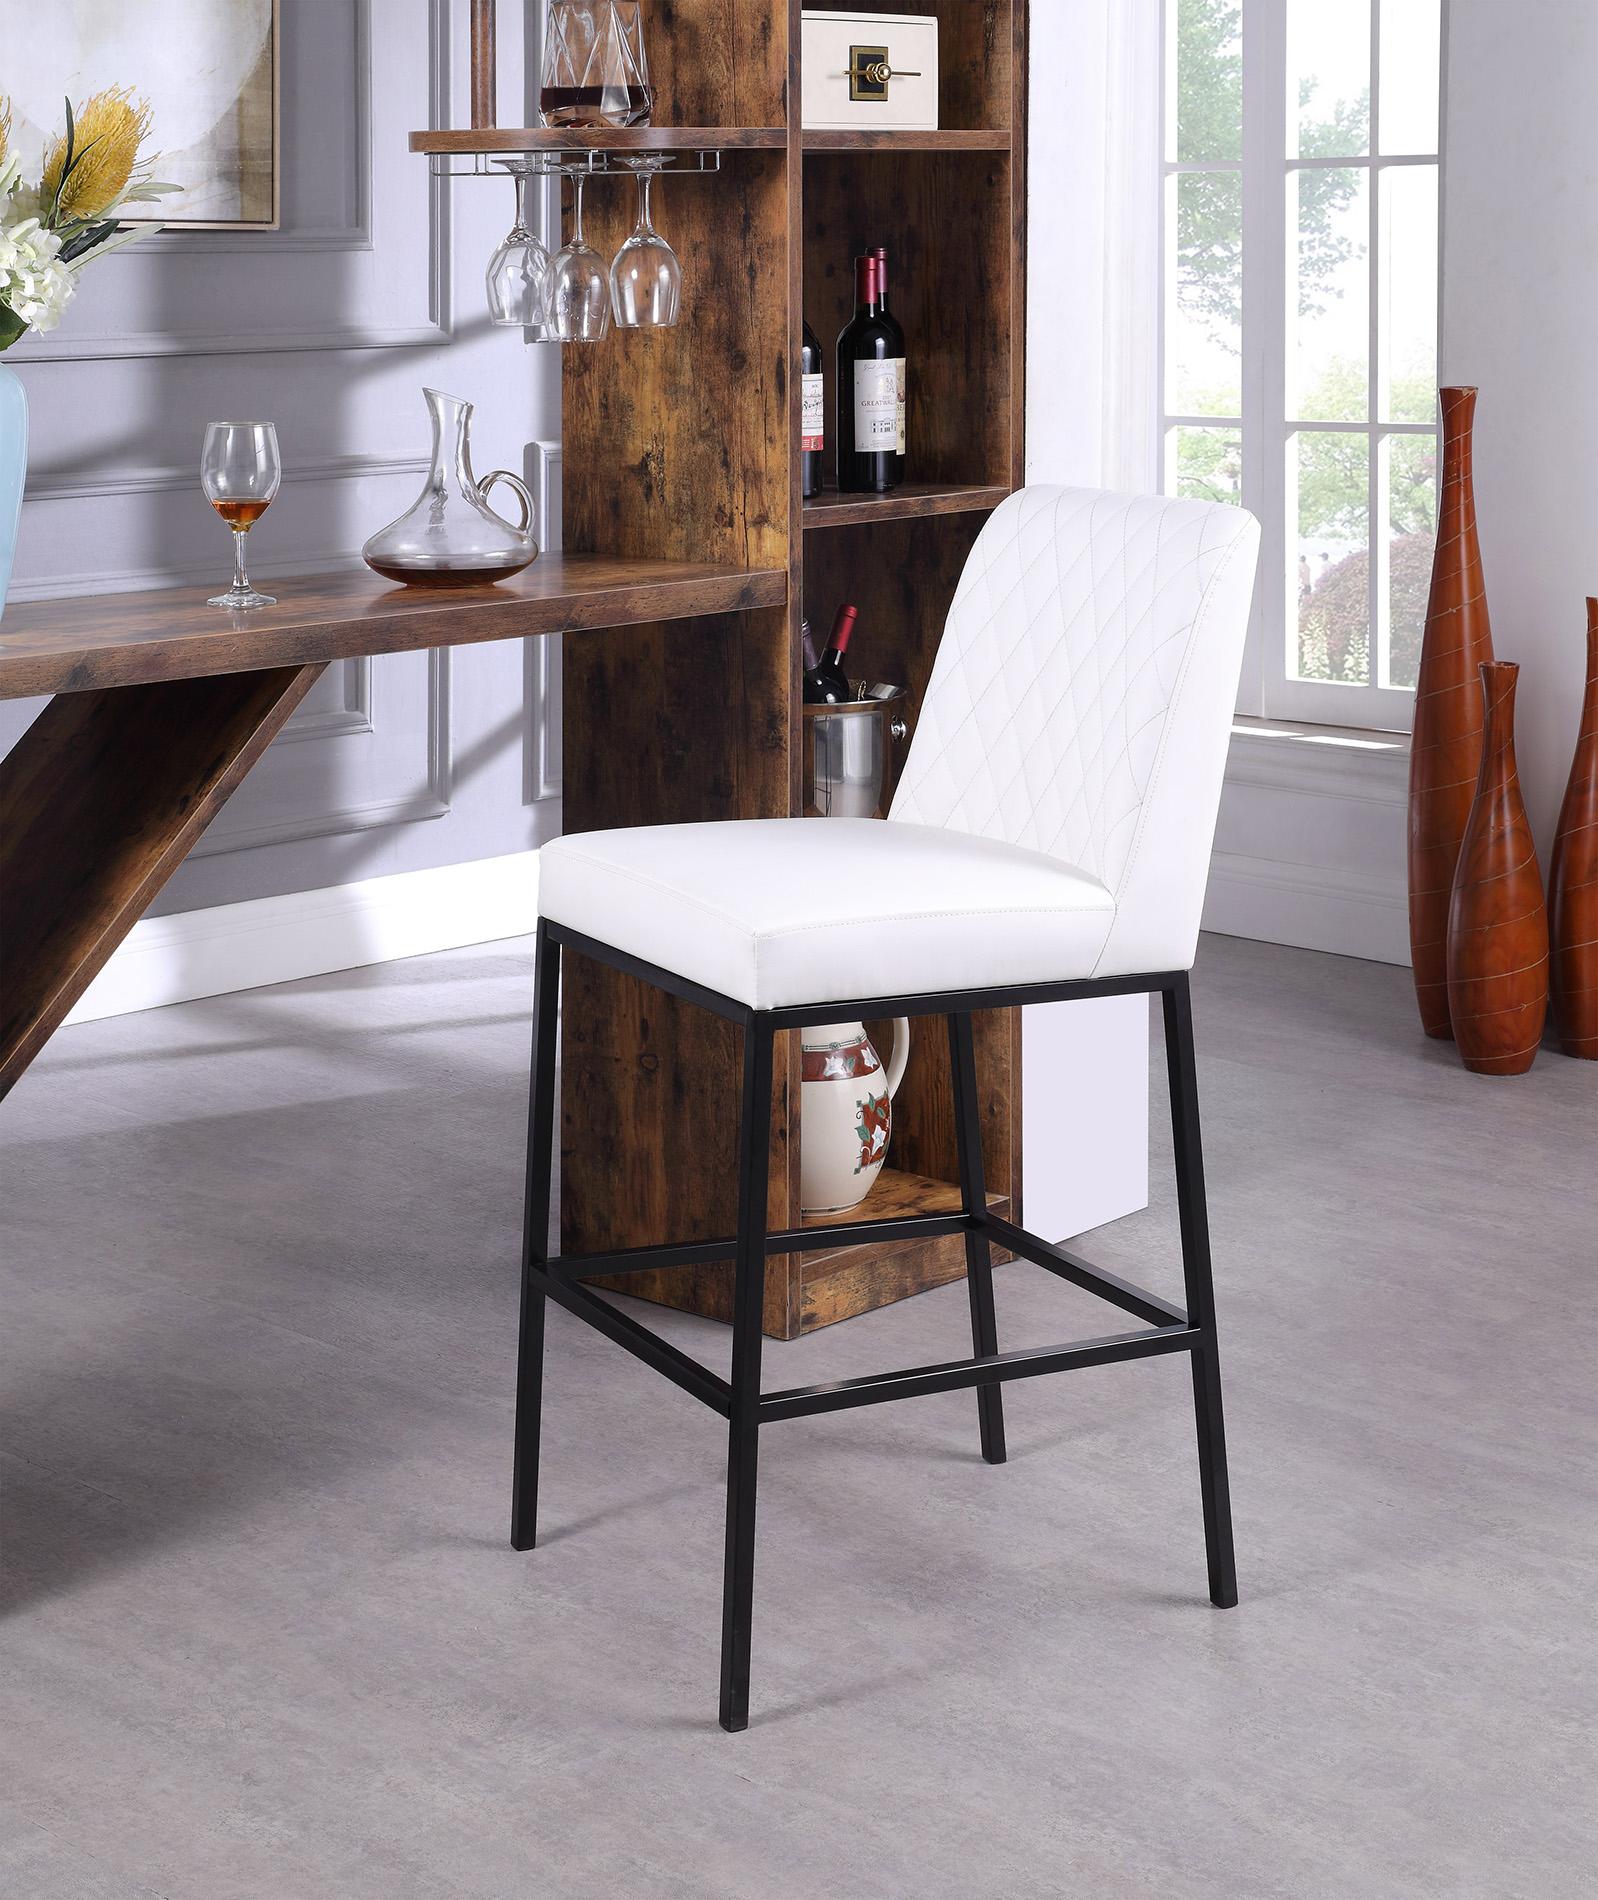 

    
White Faux Leather Bar Stool Set 2Pcs BRYCE 919White Meridian Contemporary
